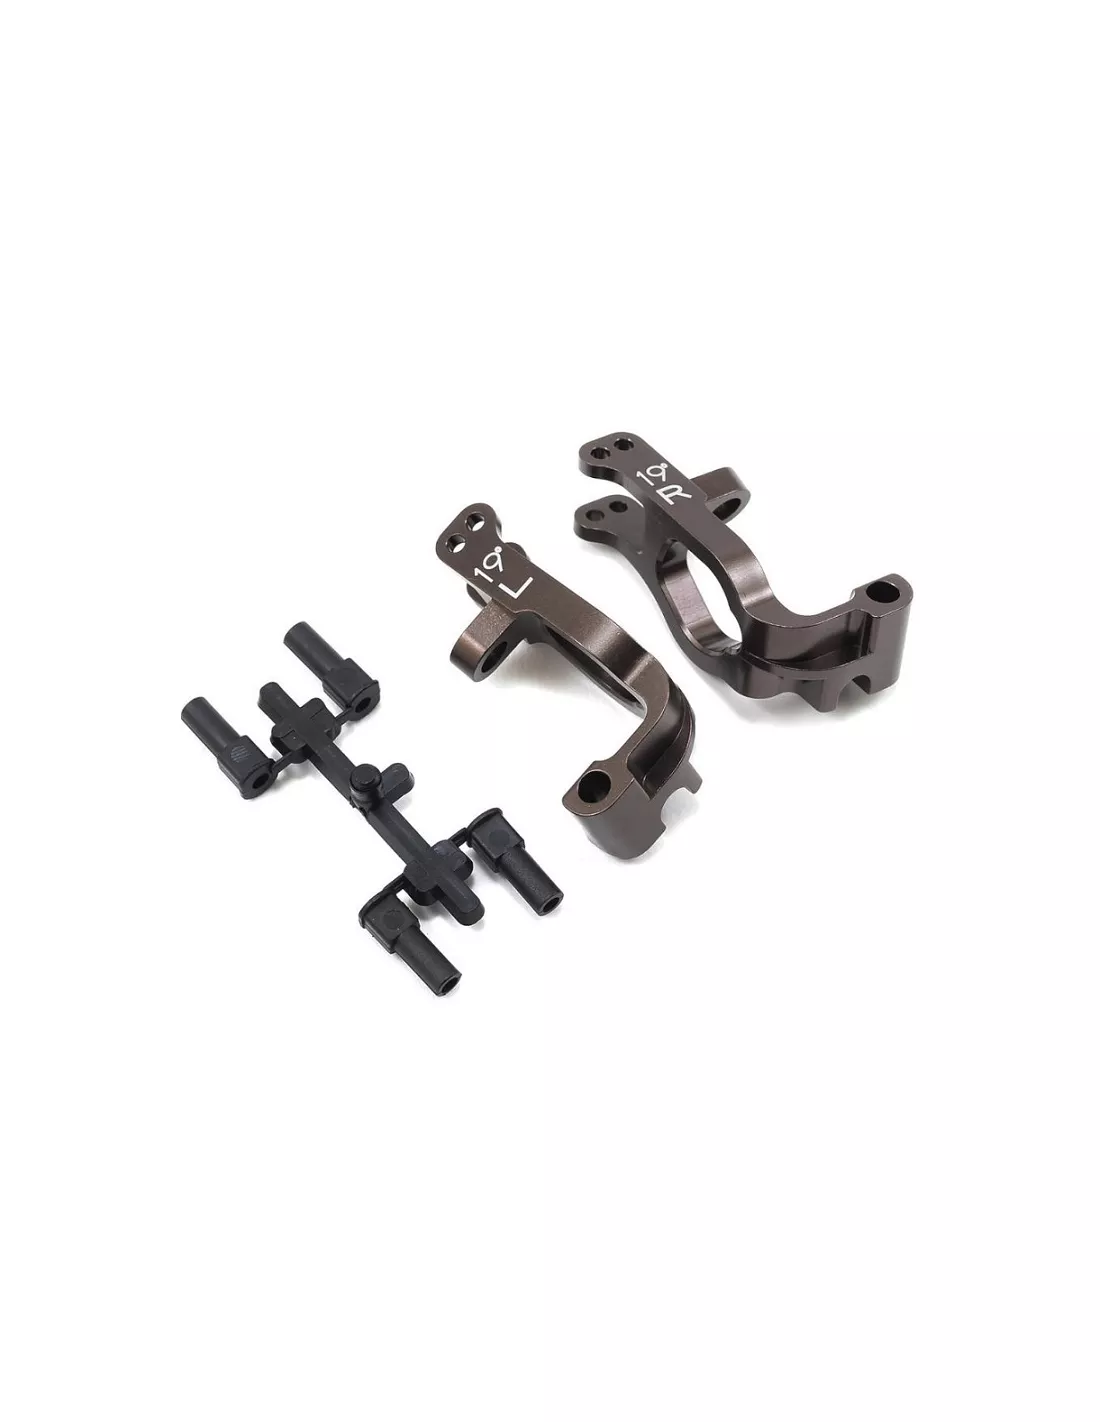 Kyosho Inferno MP10 FRONT HUB CARRIERS Aluminum Knuckle UPDATED KYO33015B 